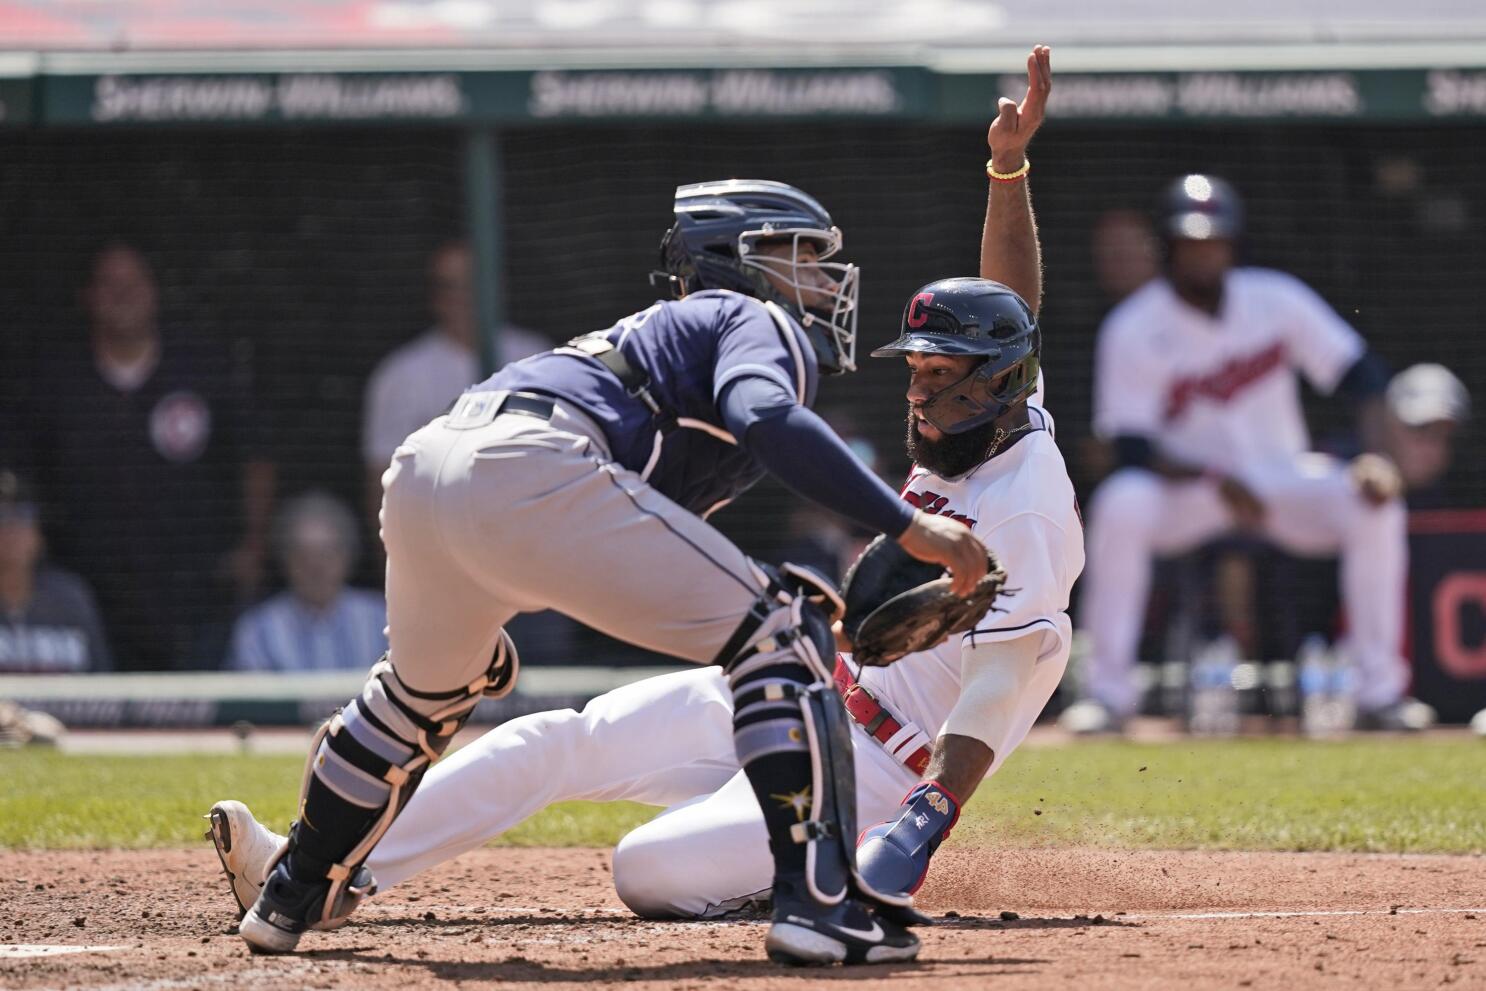 Franmil Reyes ahead of schedule in rehab from oblique strain?